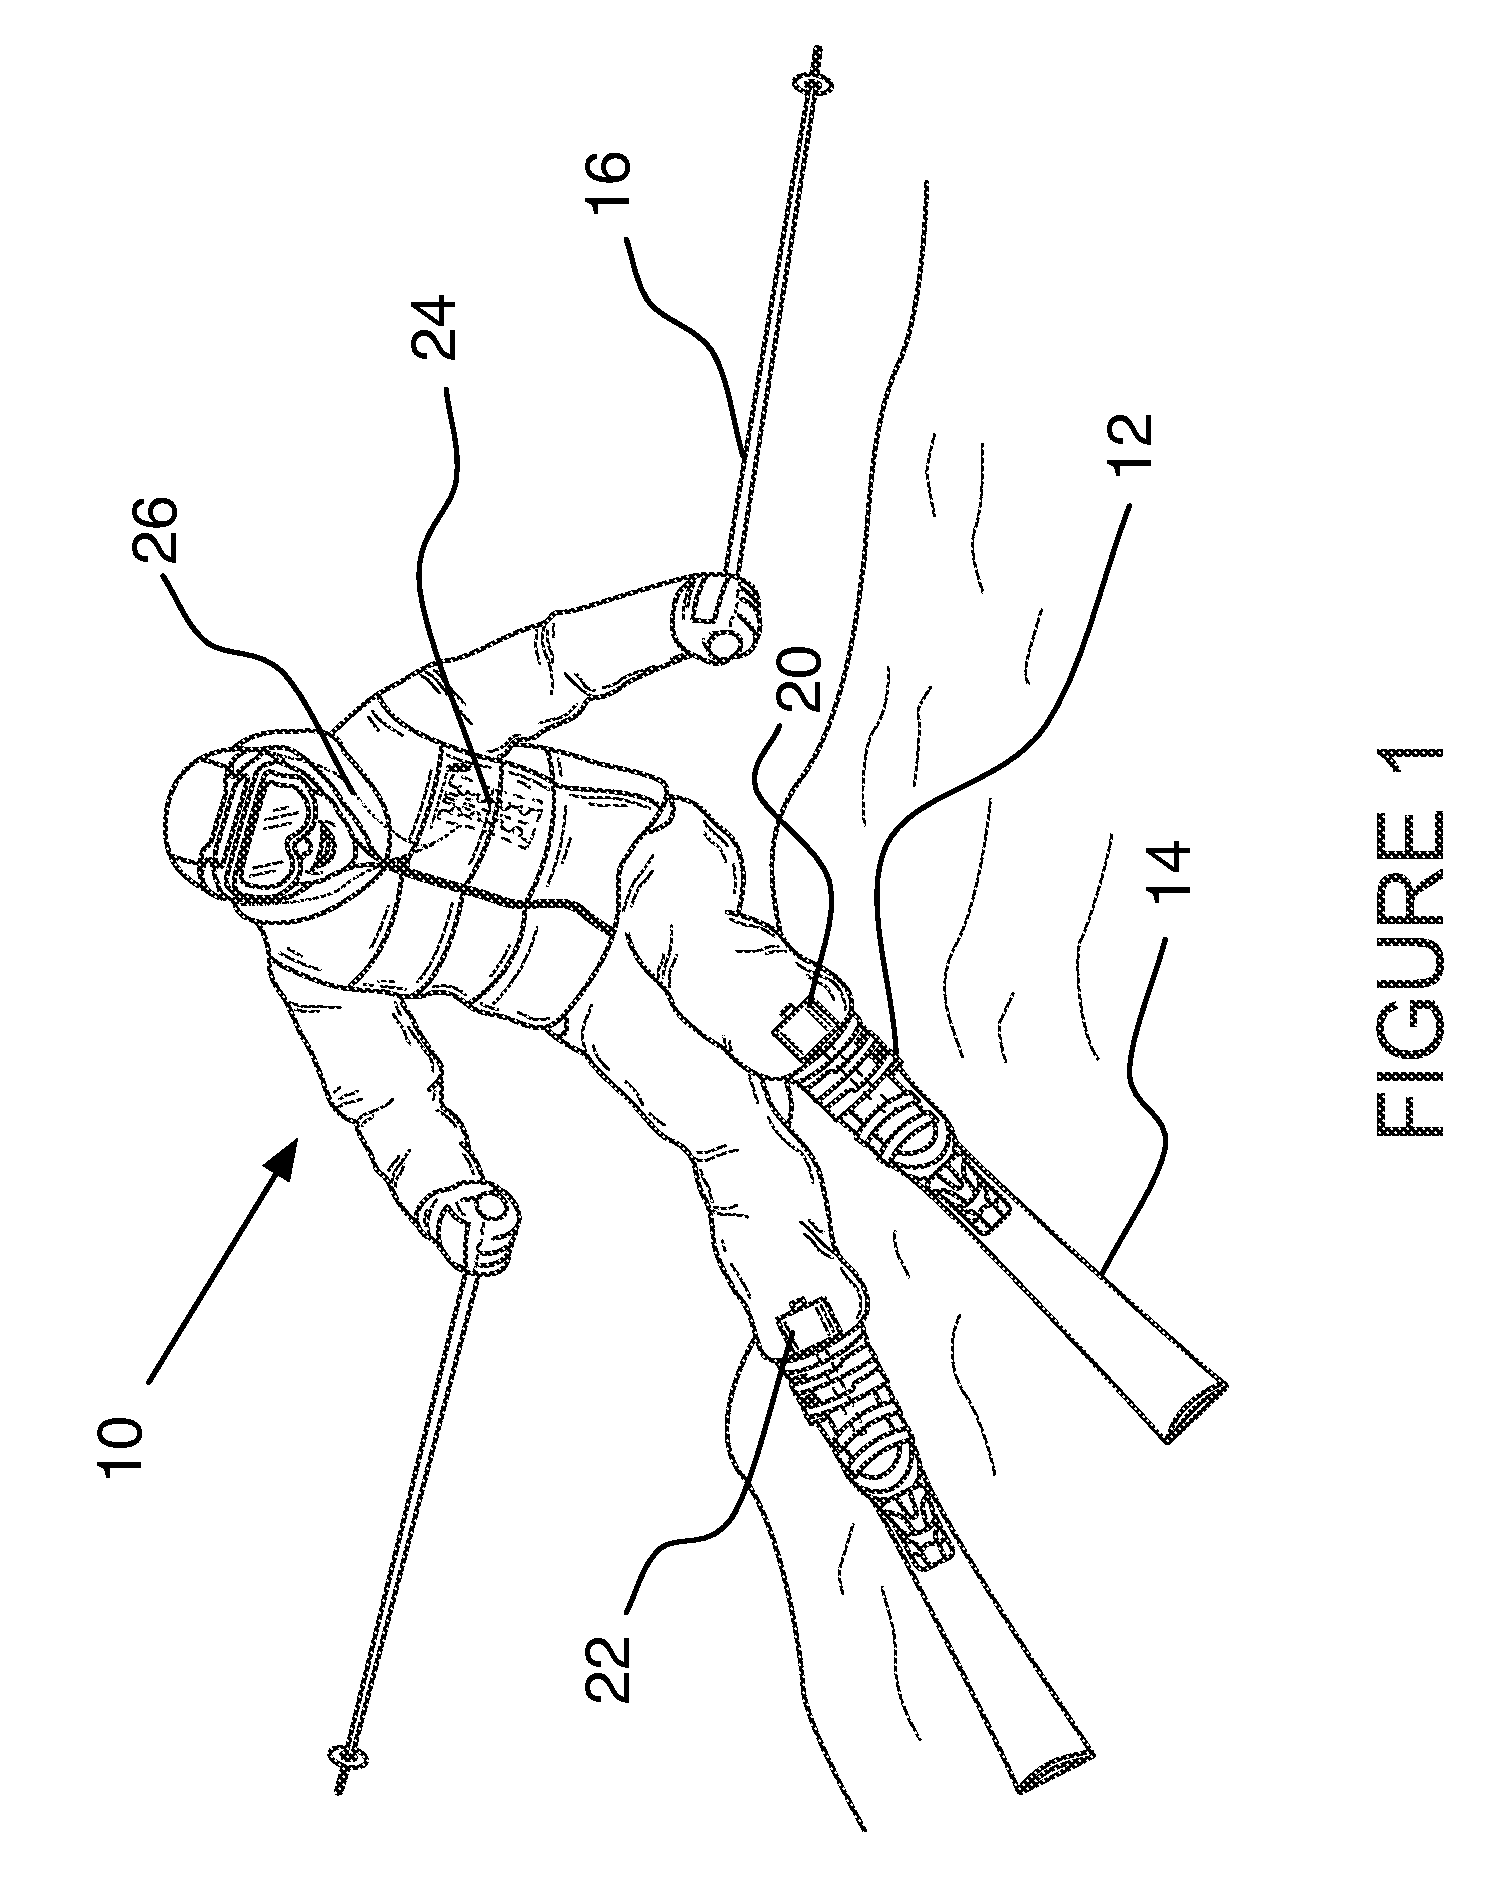 Sport performance monitoring apparatus including a flexible boot pressure sensor communicable with a boot pressure sensor input, process and method of use